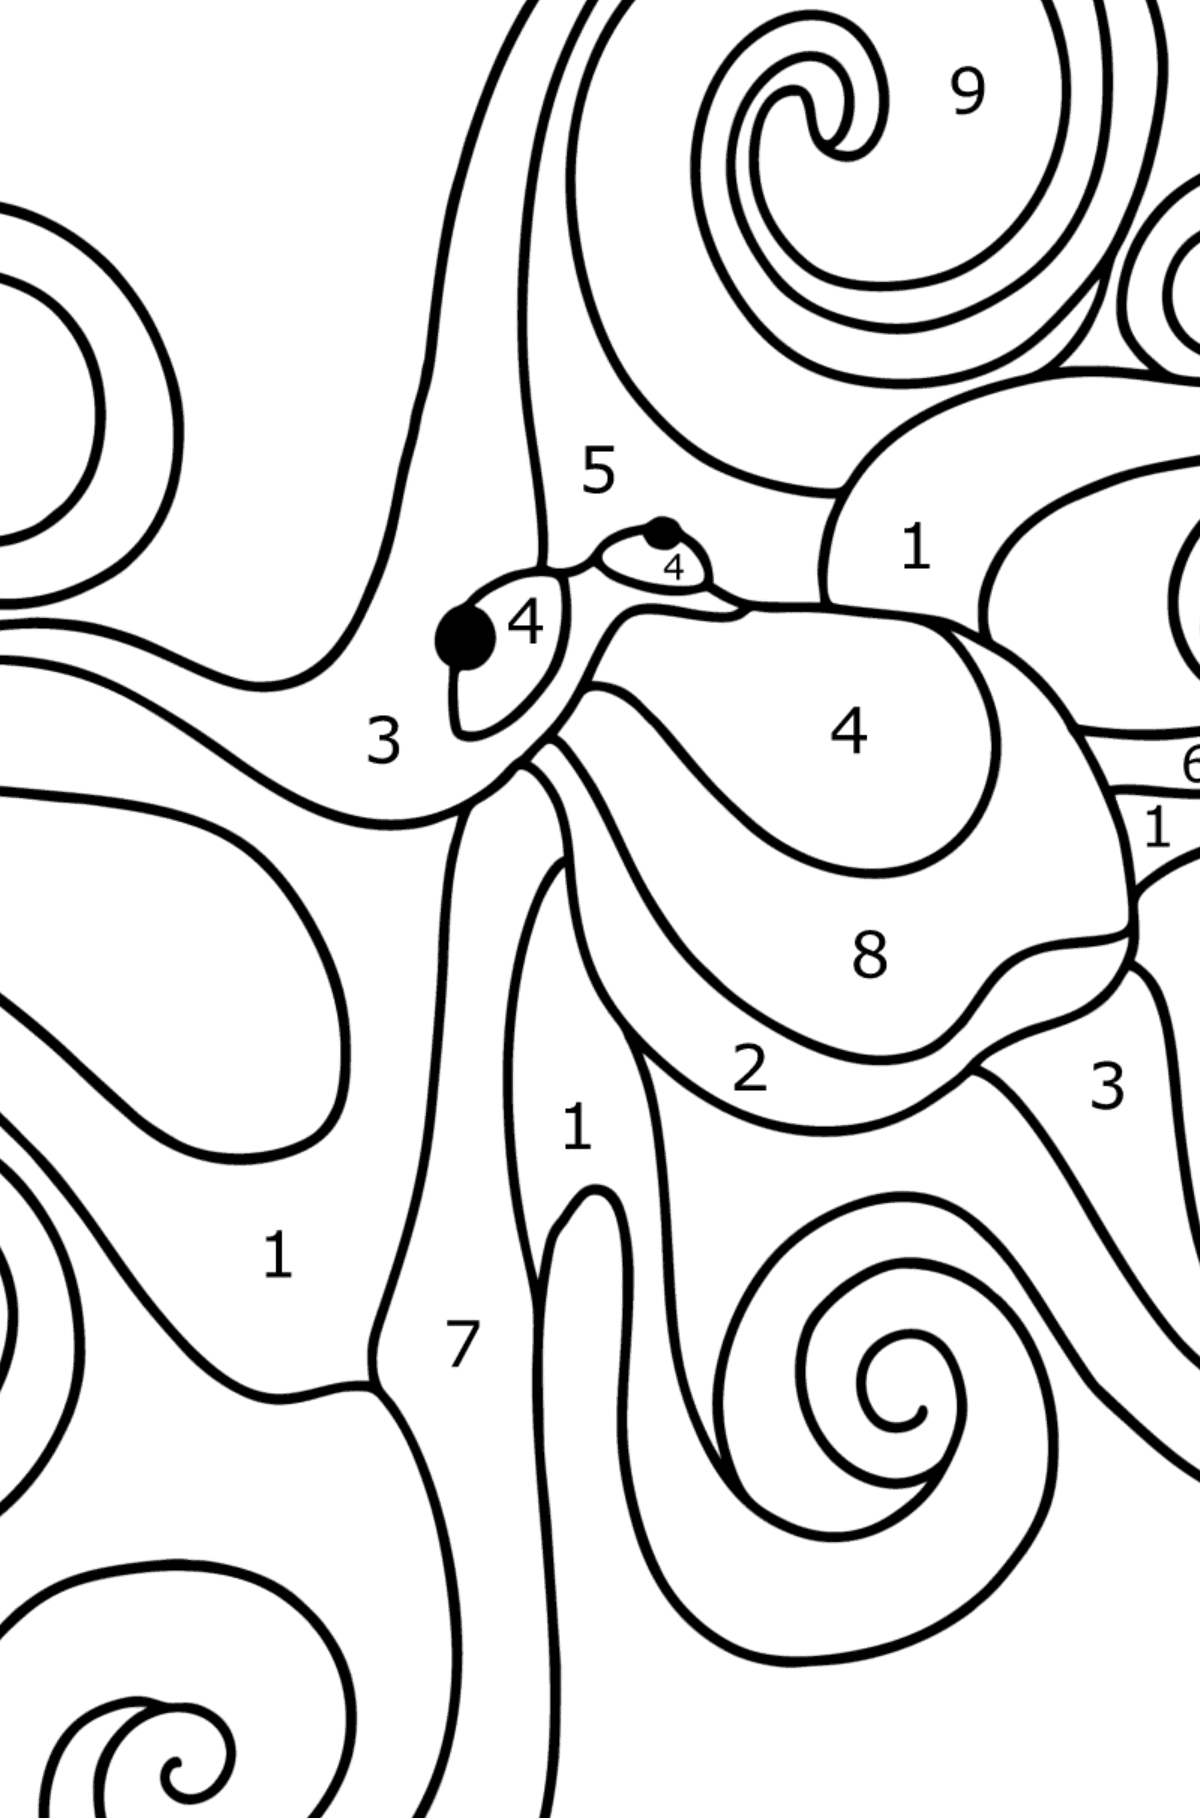 Common octopus coloring page - Coloring by Numbers for Kids